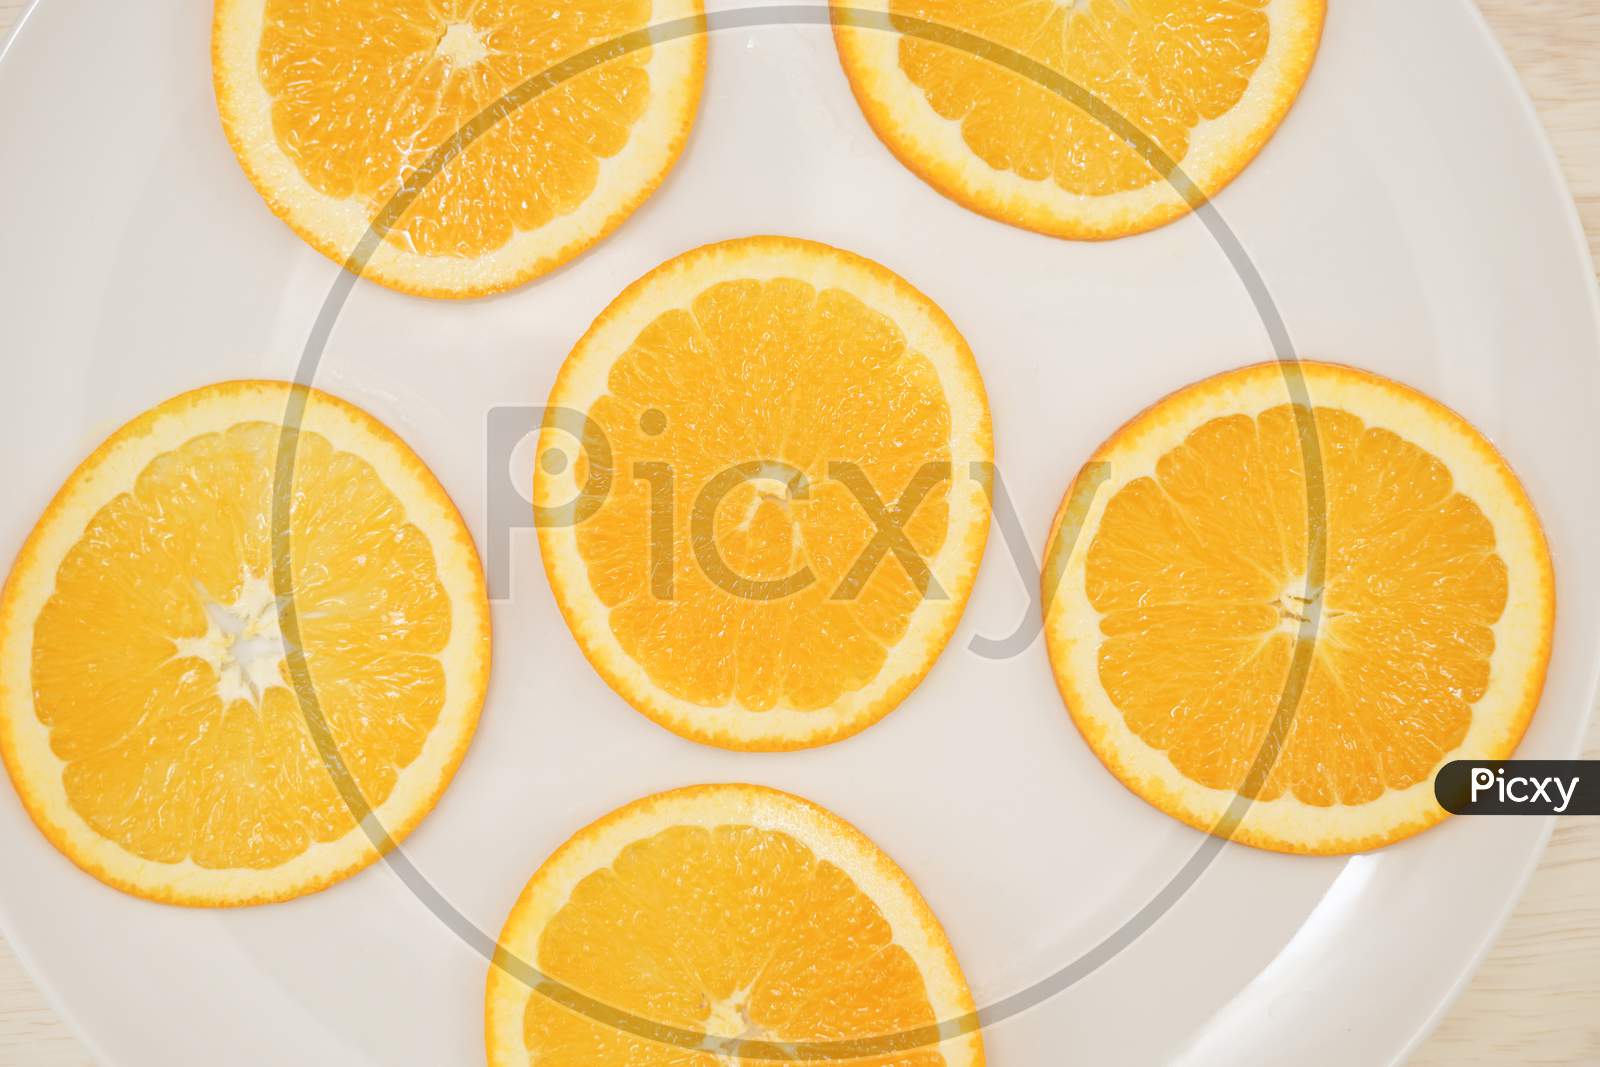 Image Of Orange Placed On A Plate